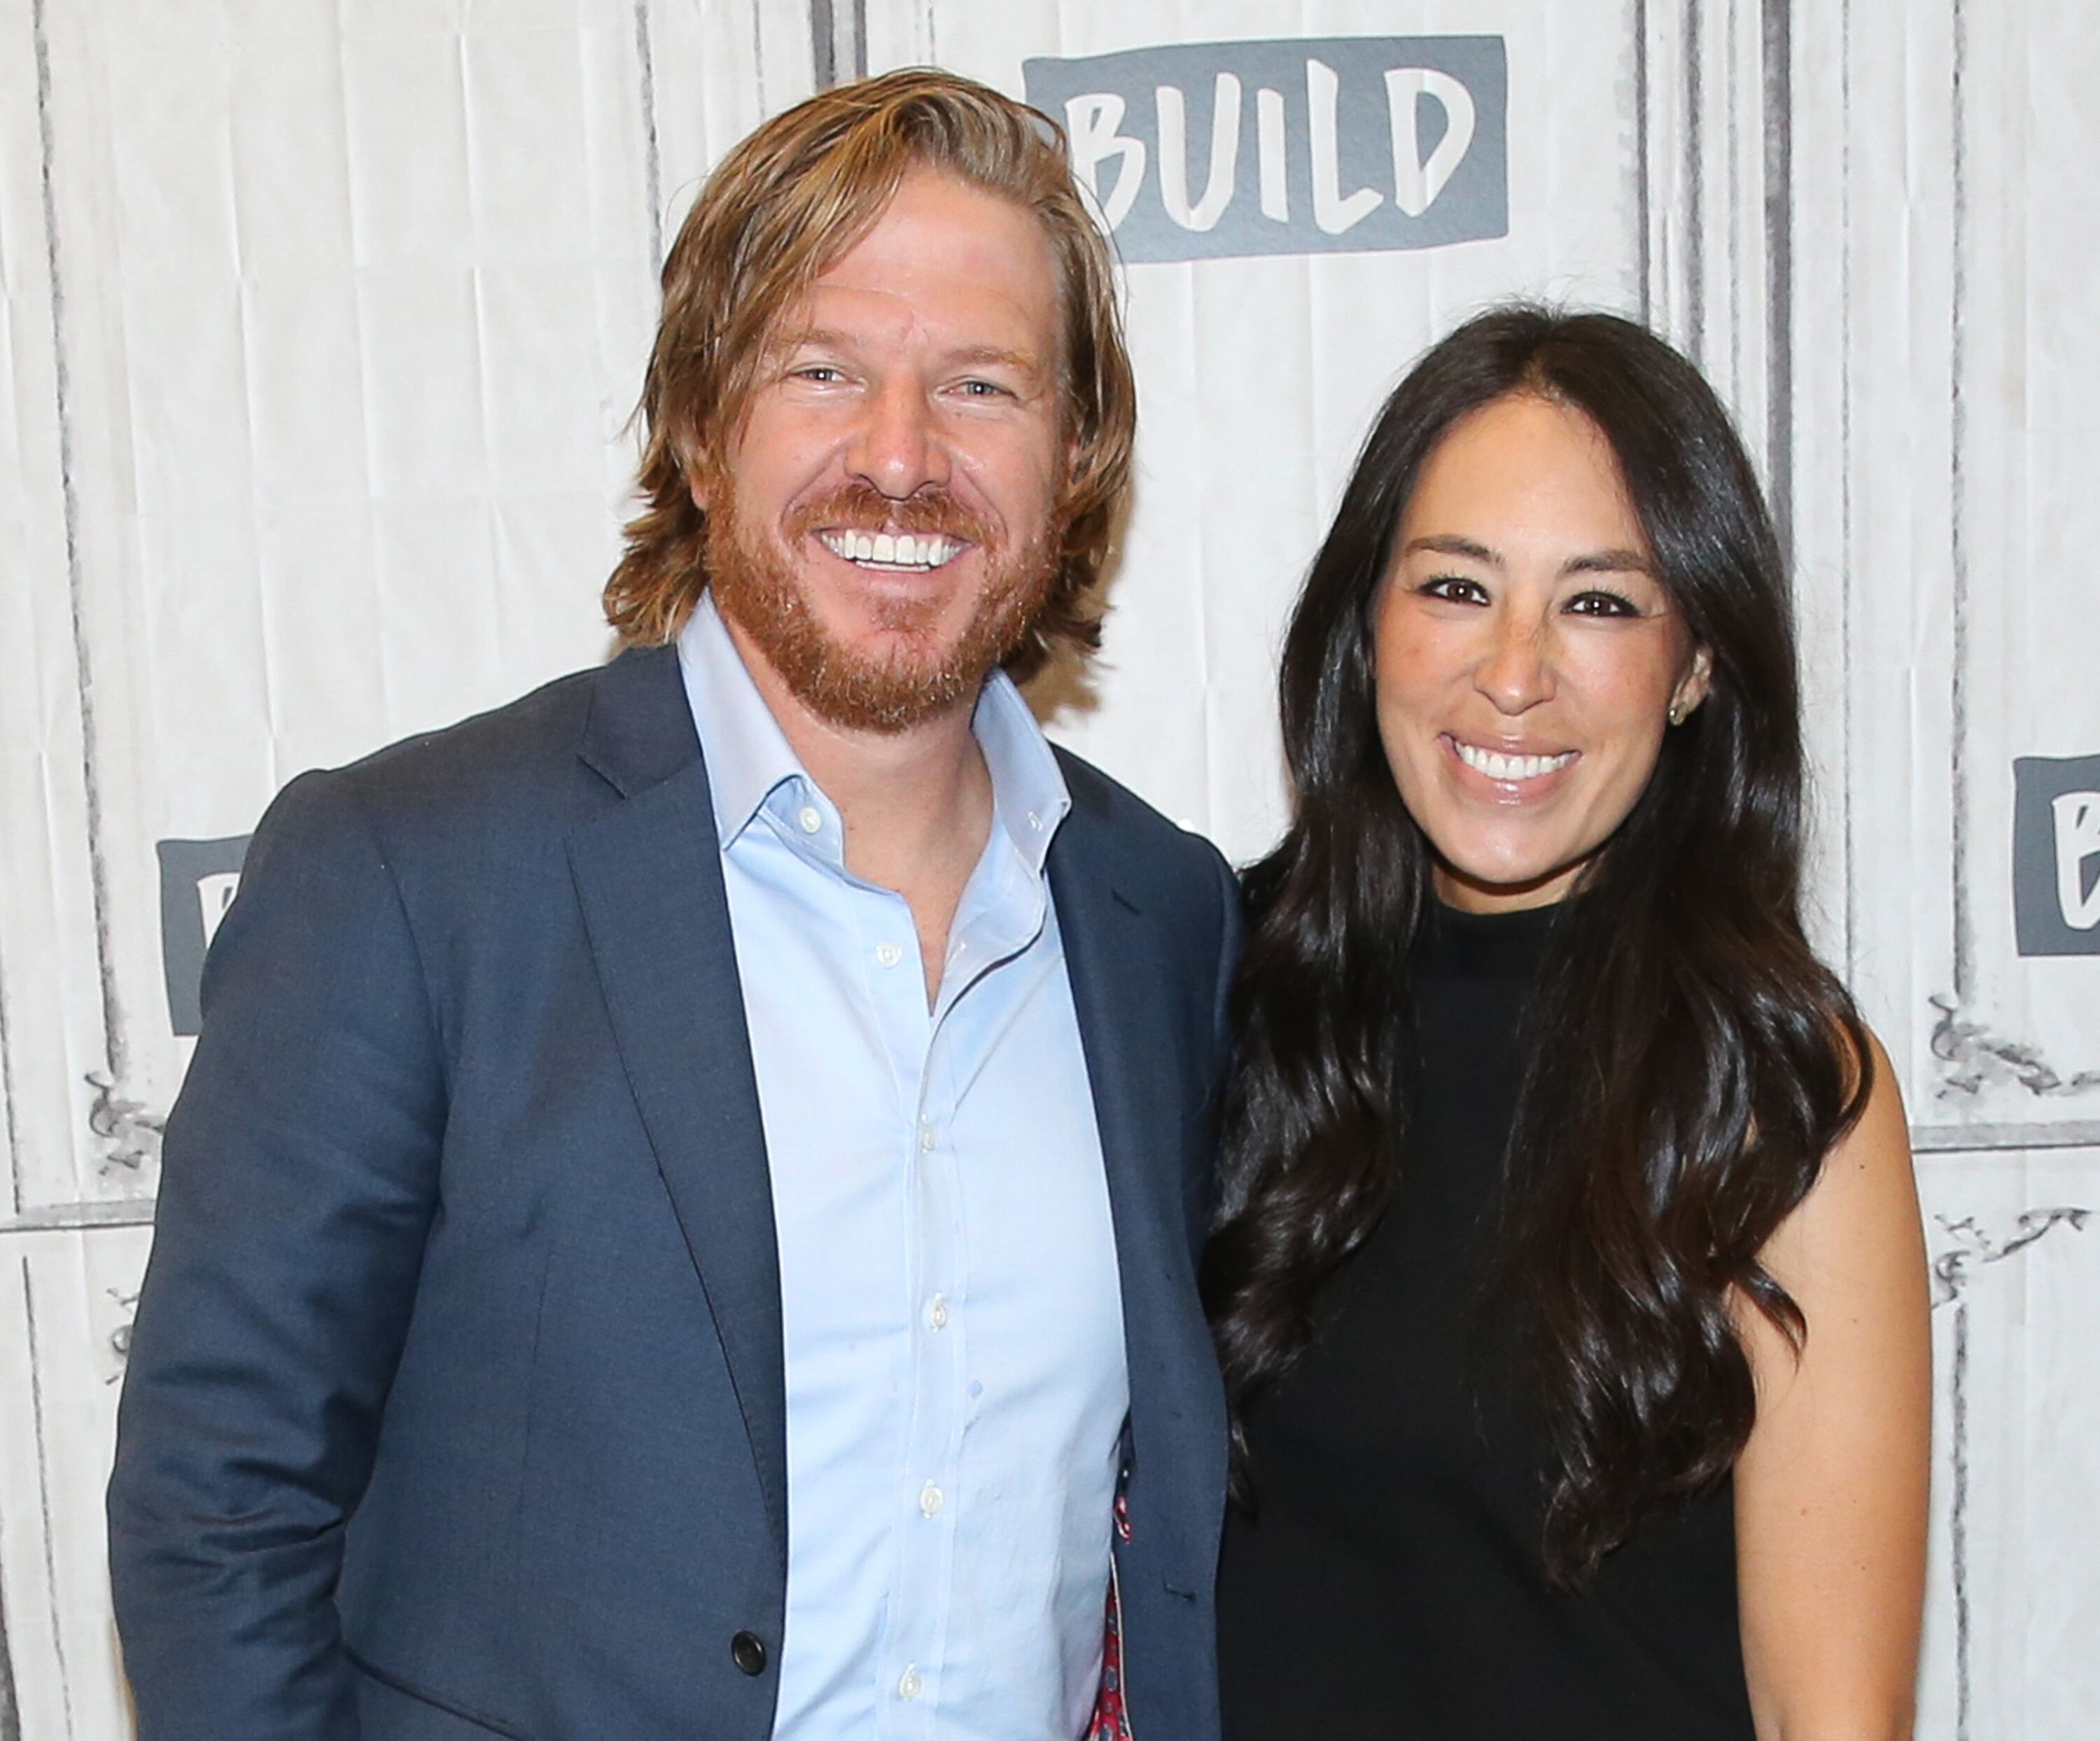  Chip Gaines and Joanna Gaines attend the Build Series at Build Studio on October 18, 2017 in New York City | Photo: Getty Images